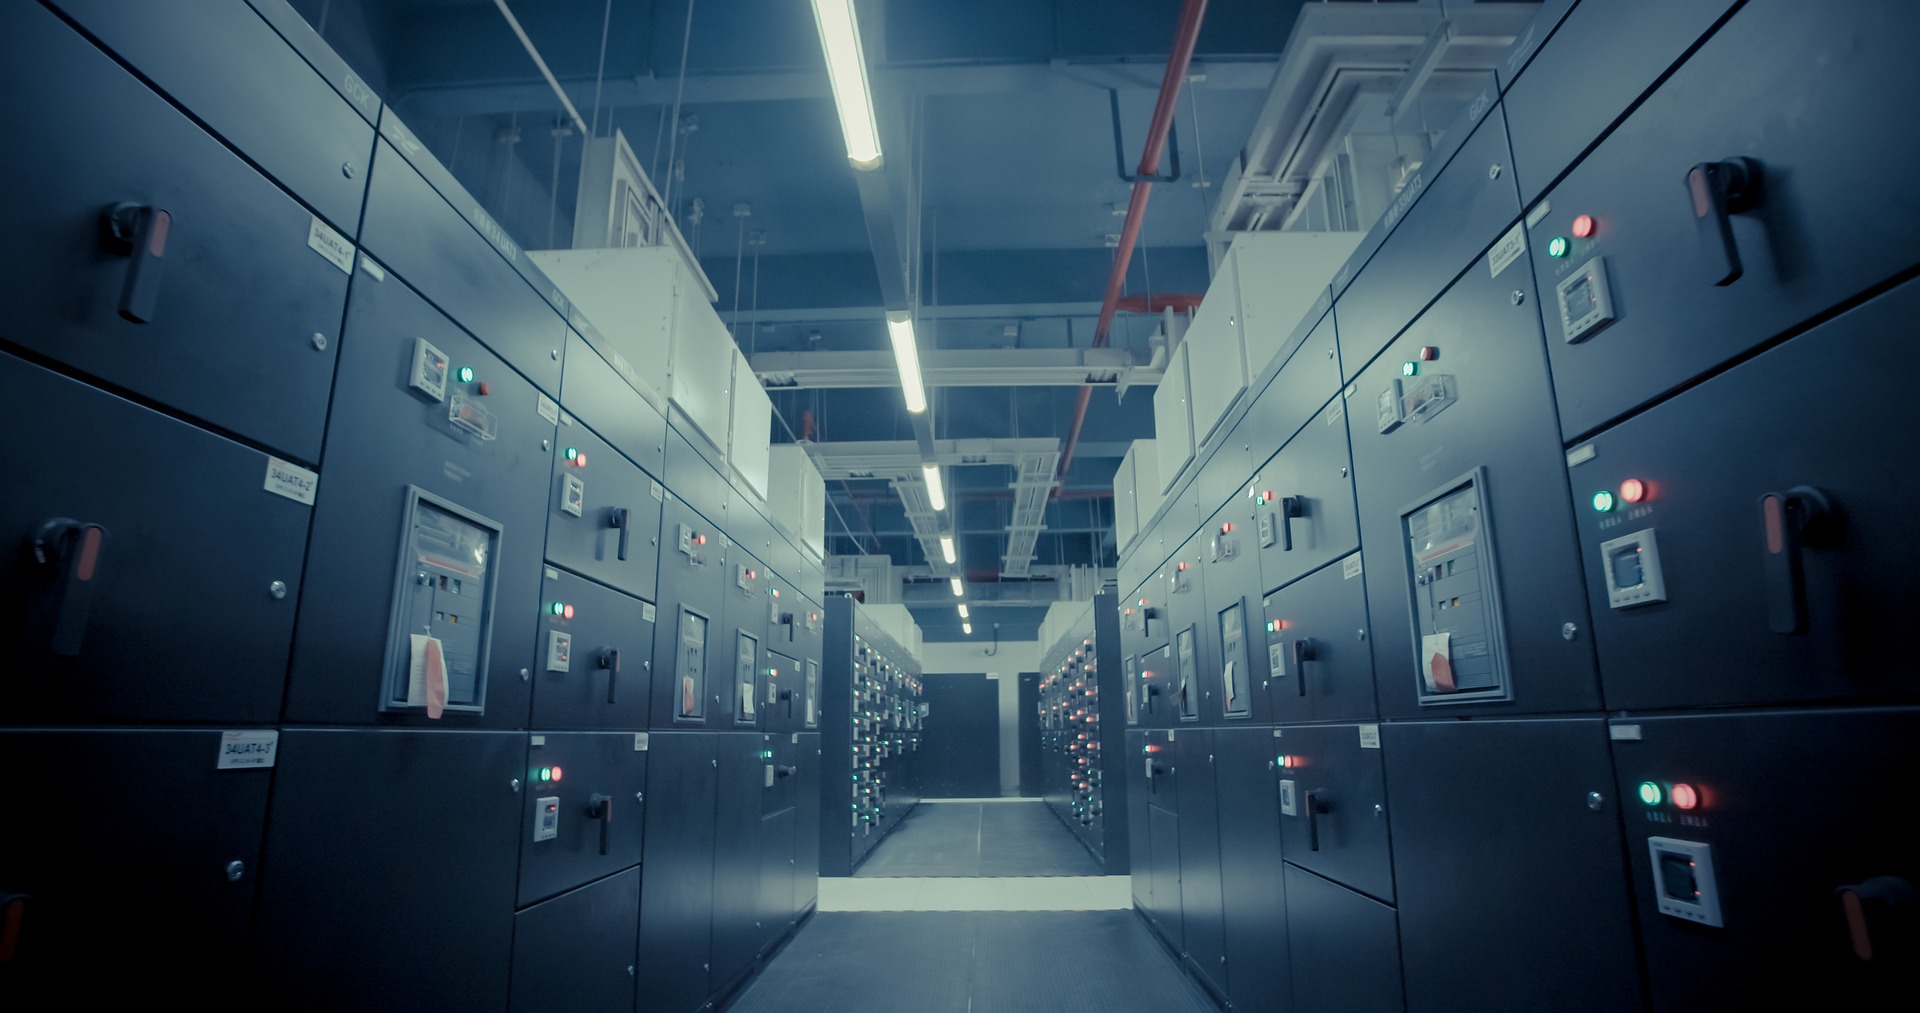 Why Data Centres Need Thermal Storage Tanks